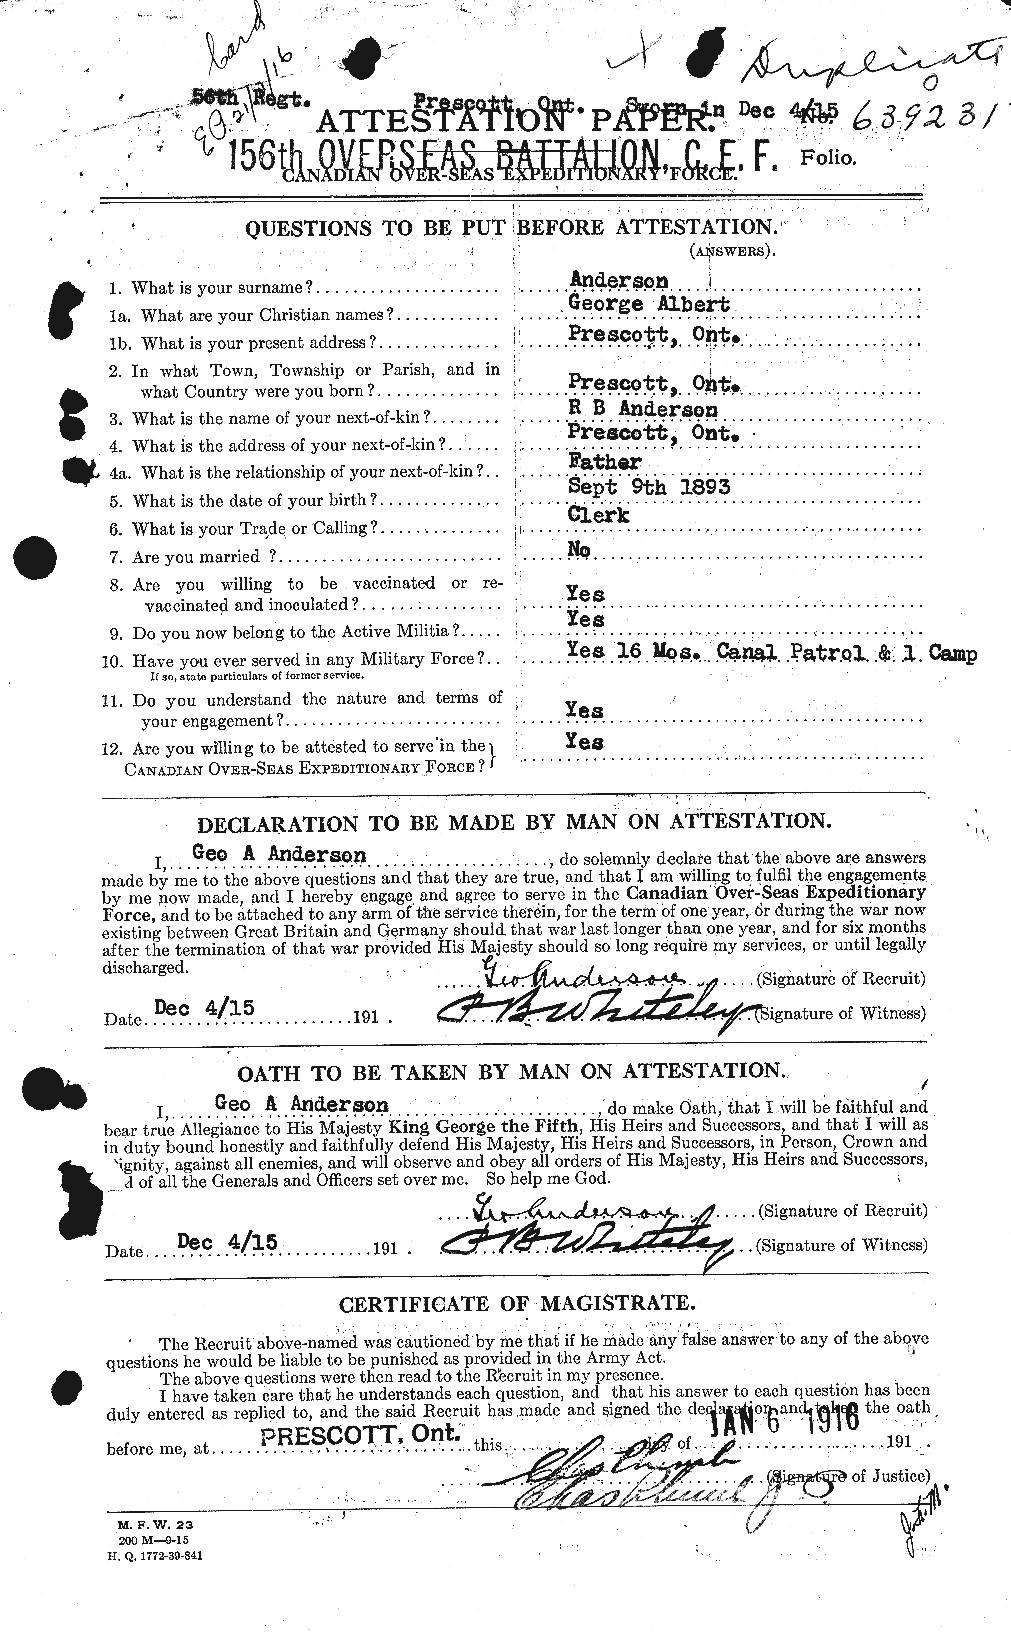 Personnel Records of the First World War - CEF 209743a